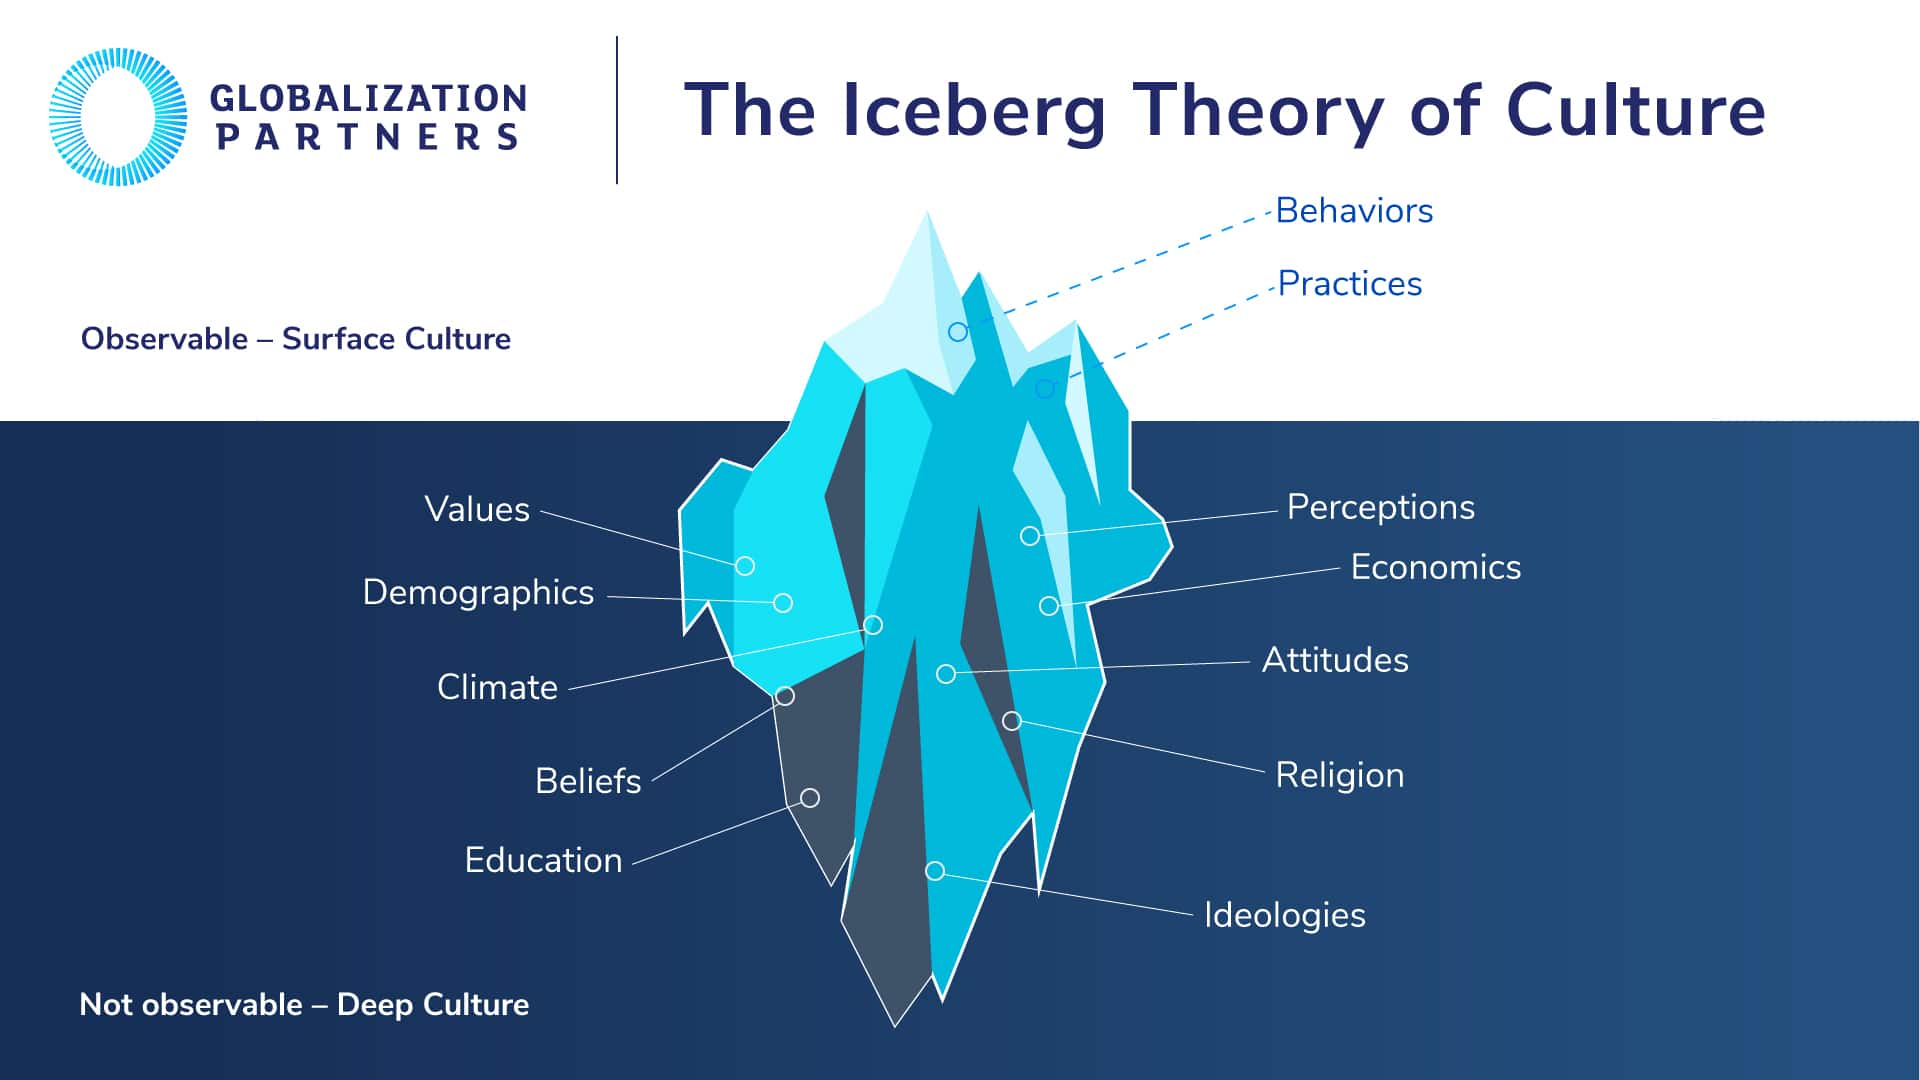 Graphic of The Iceberg Theory of Culture